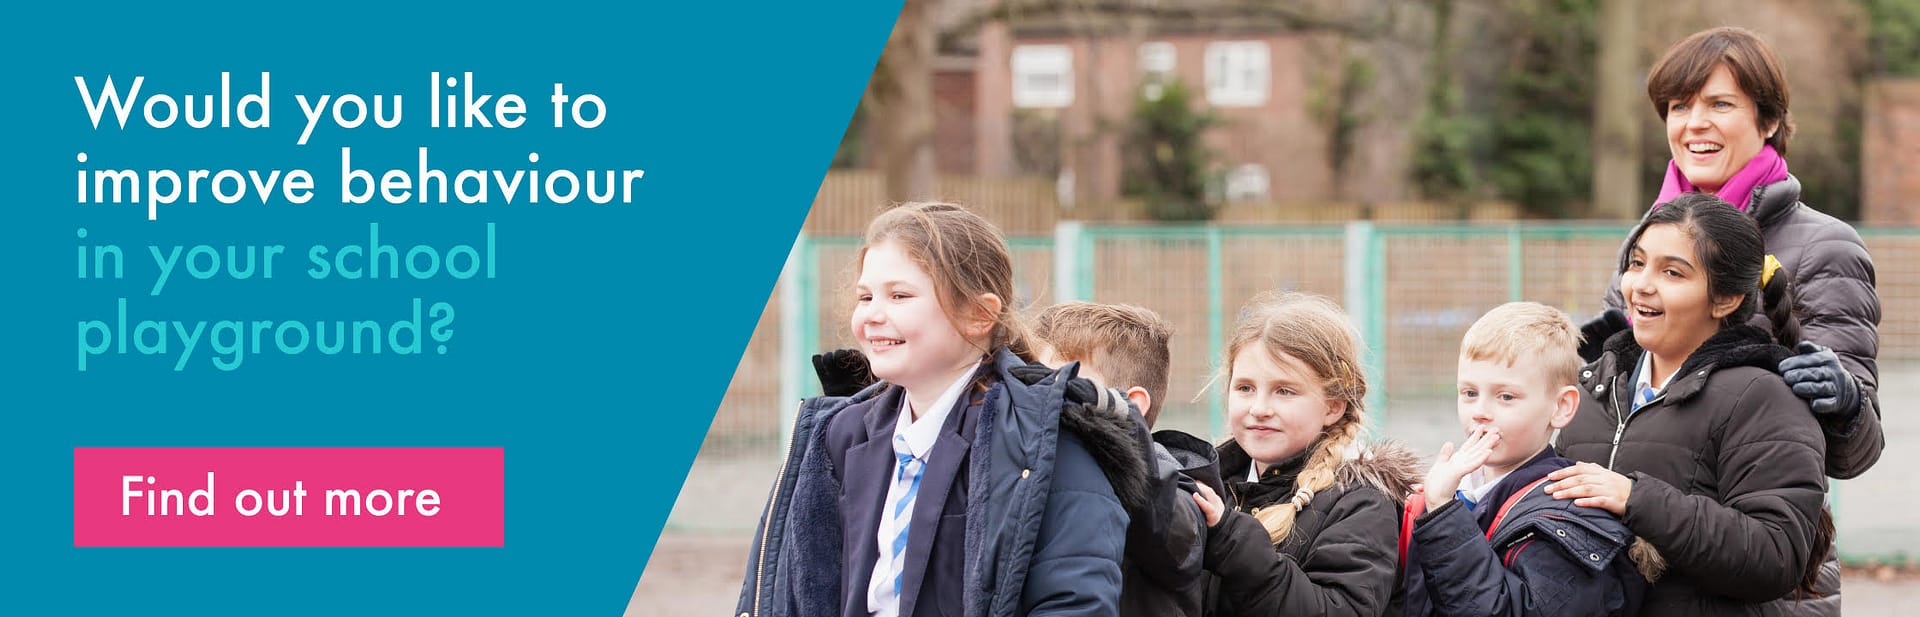 Would you like to improve behaviour in your school playground?